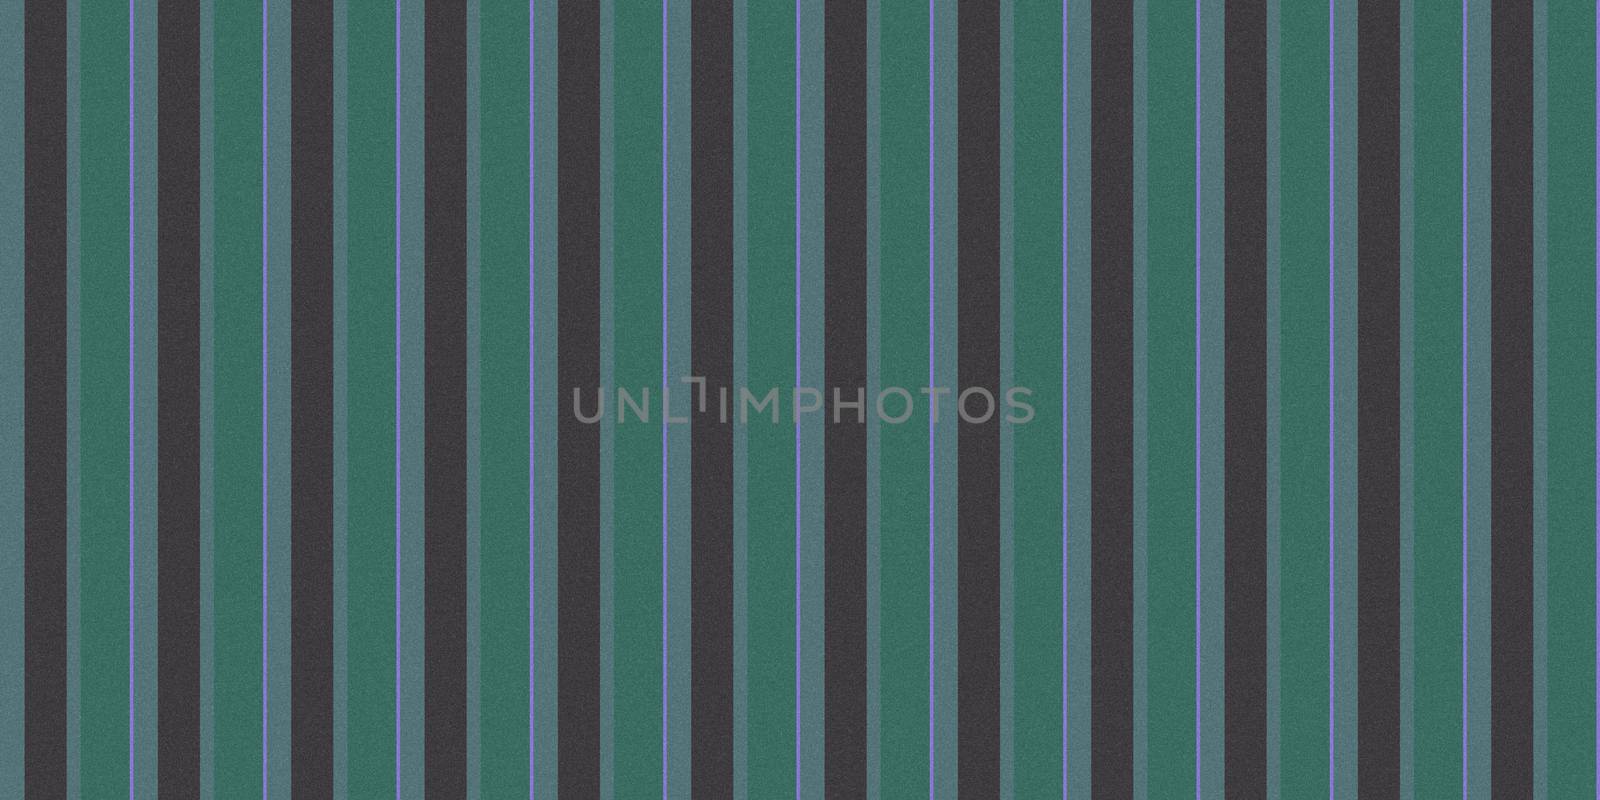 Dark Turquoise Gray Seamless Striped Lines Background Texture. Modern Vintage Style Pattern. by sanches812